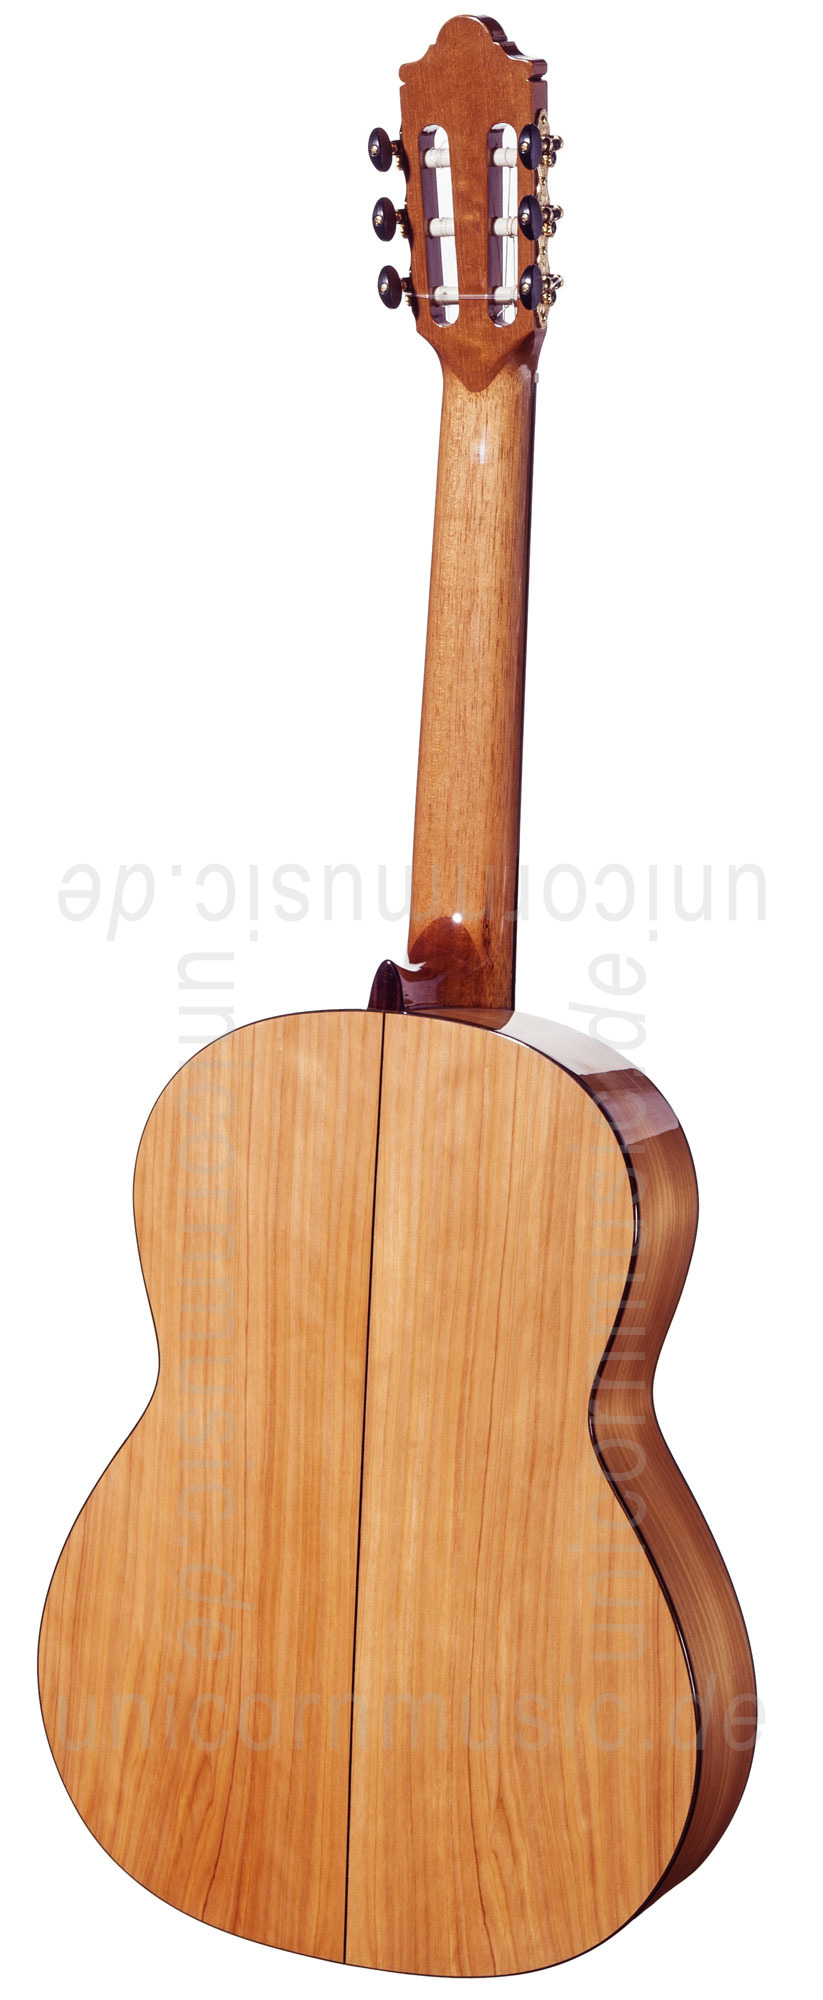 to article description / price Spanish Flamenco Guitar CAMPS M5-S (blanca) - solid spruce top